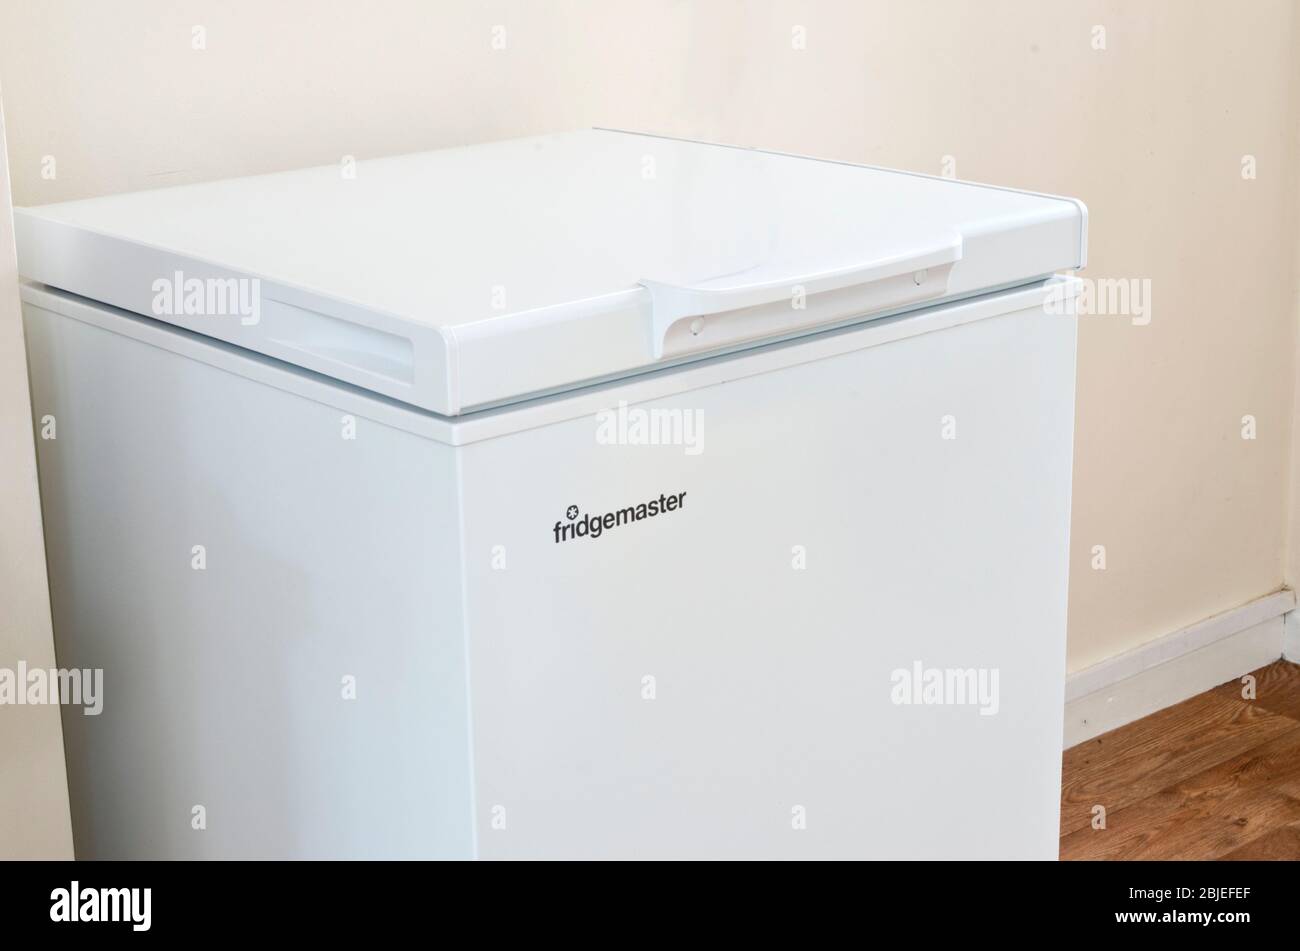 Fridgemaster Domestic Upright Chest Freezer Appliance or White Goods In A Home Environment Stock Photo